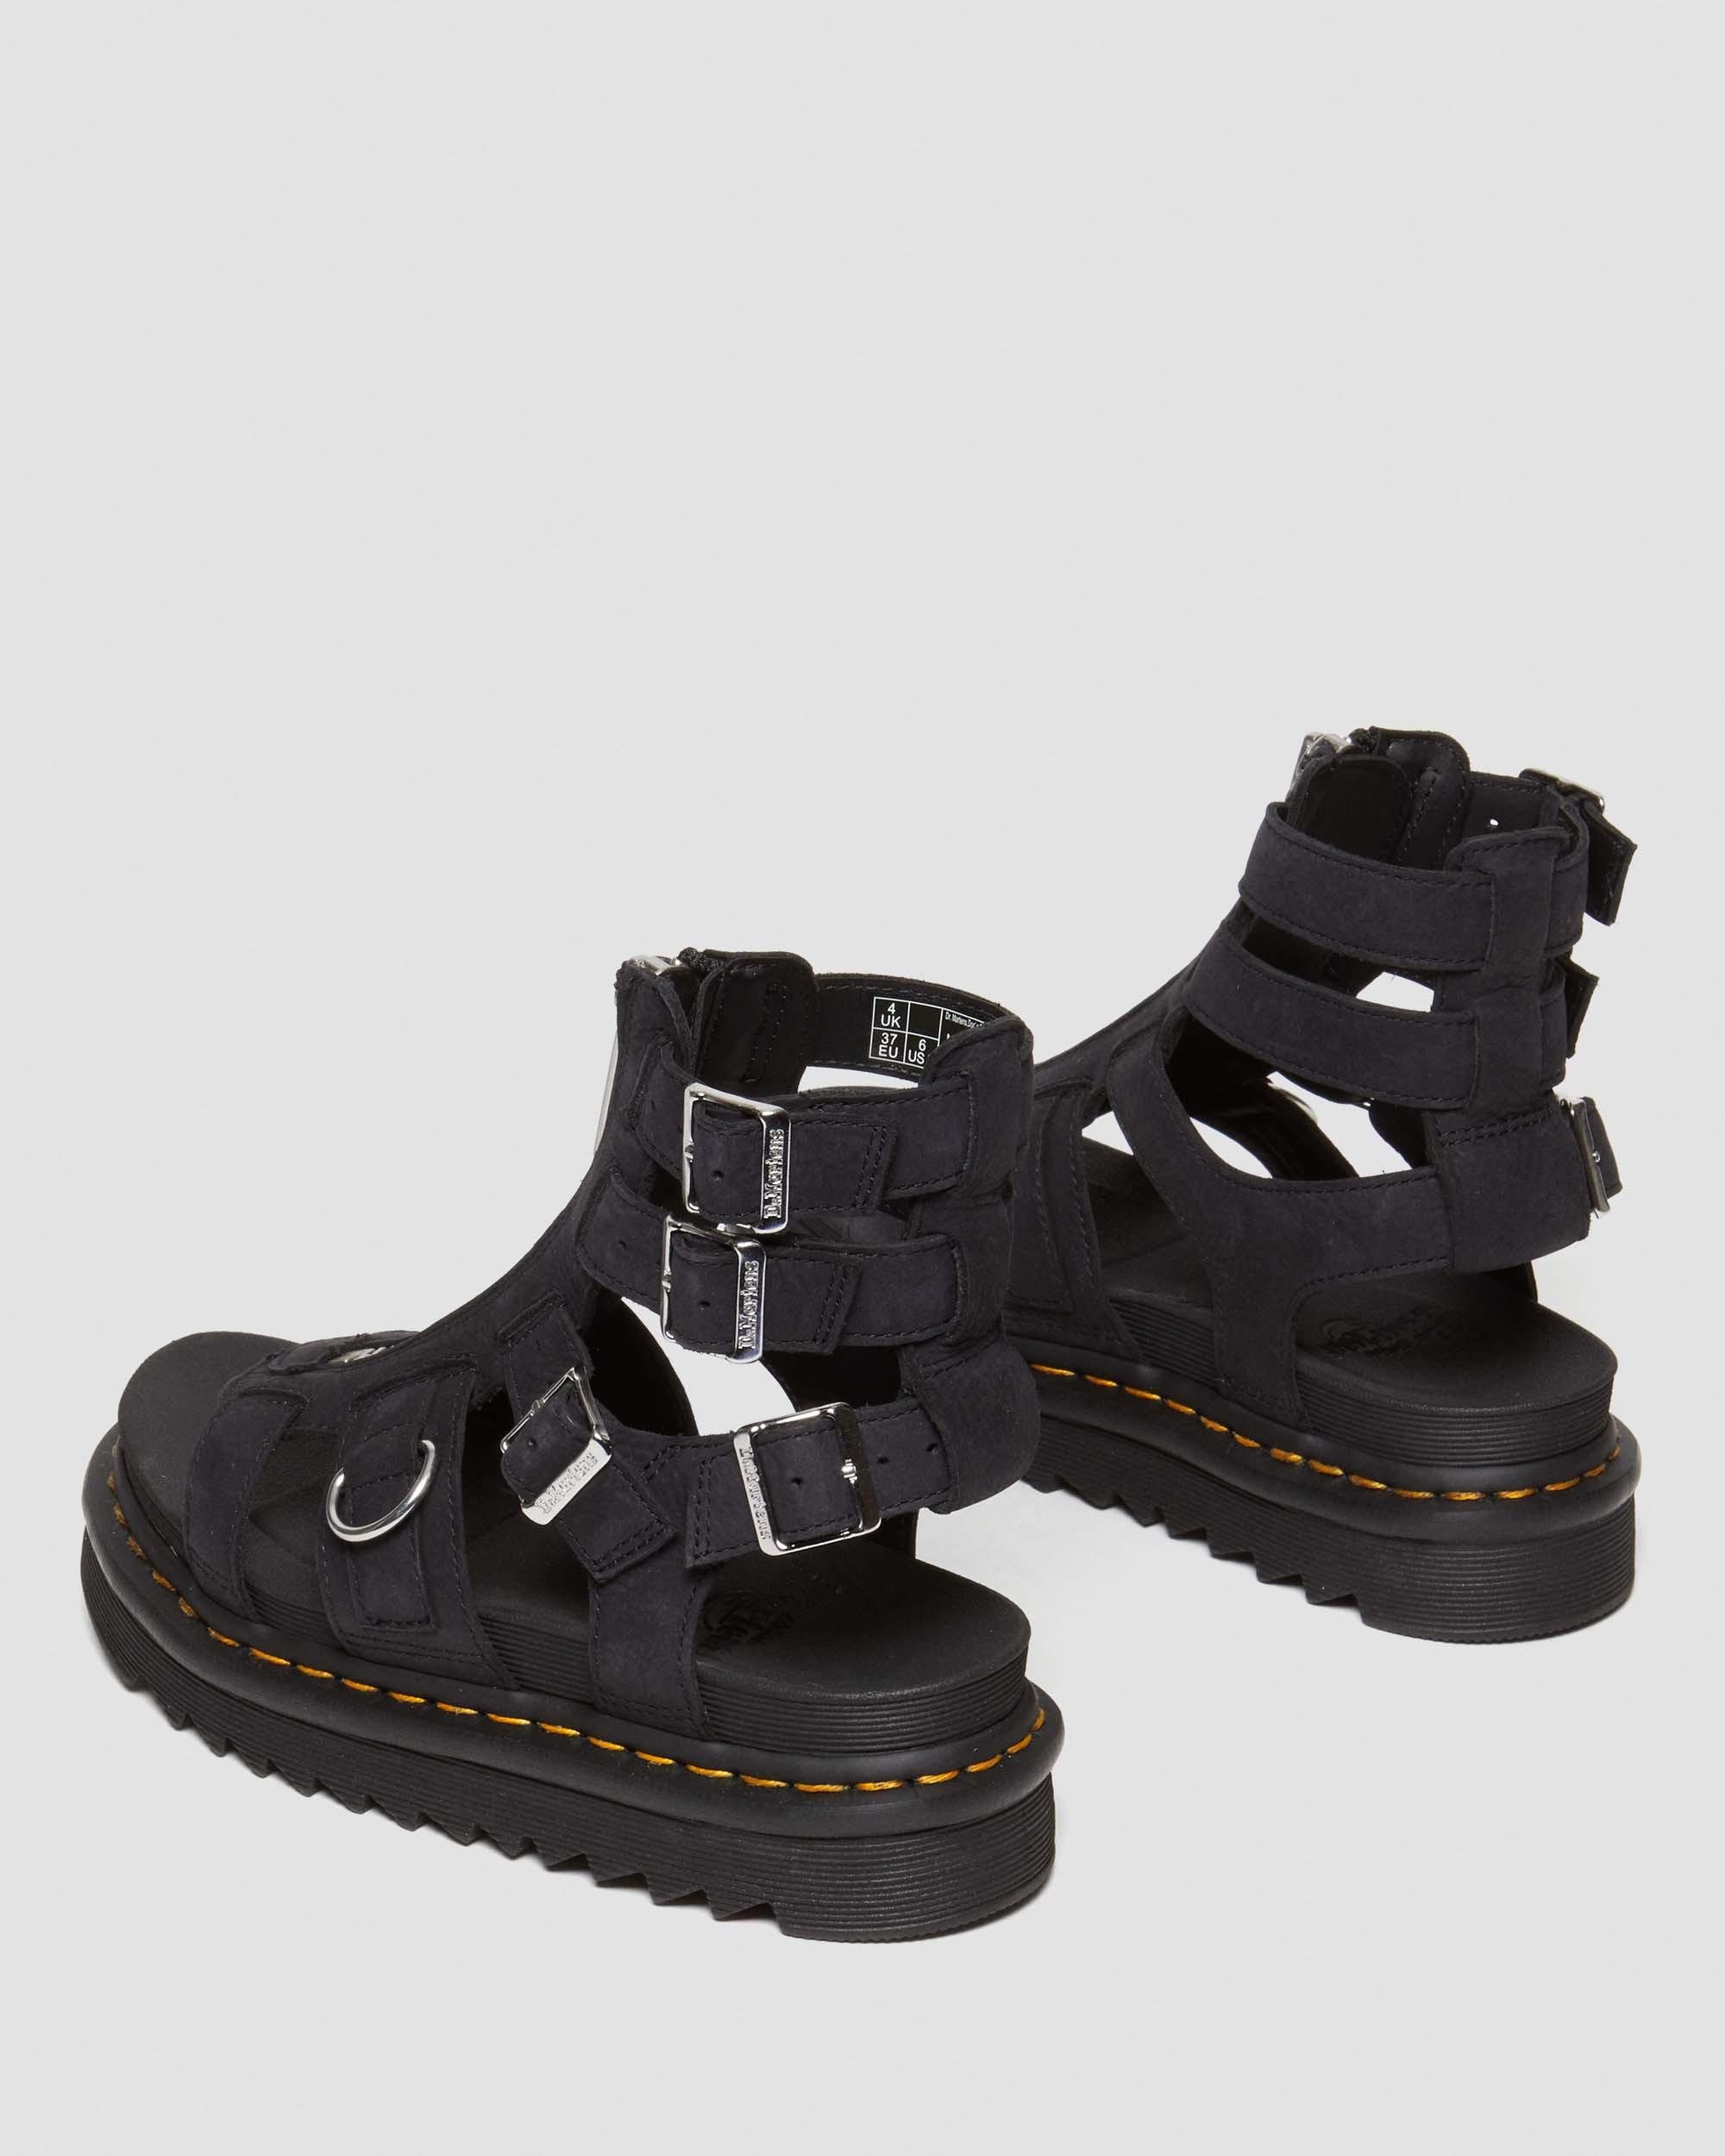 Olson Tumbled Nubuck Leather Gladiator Zip Sandals, Charcoal Grey | Dr ...